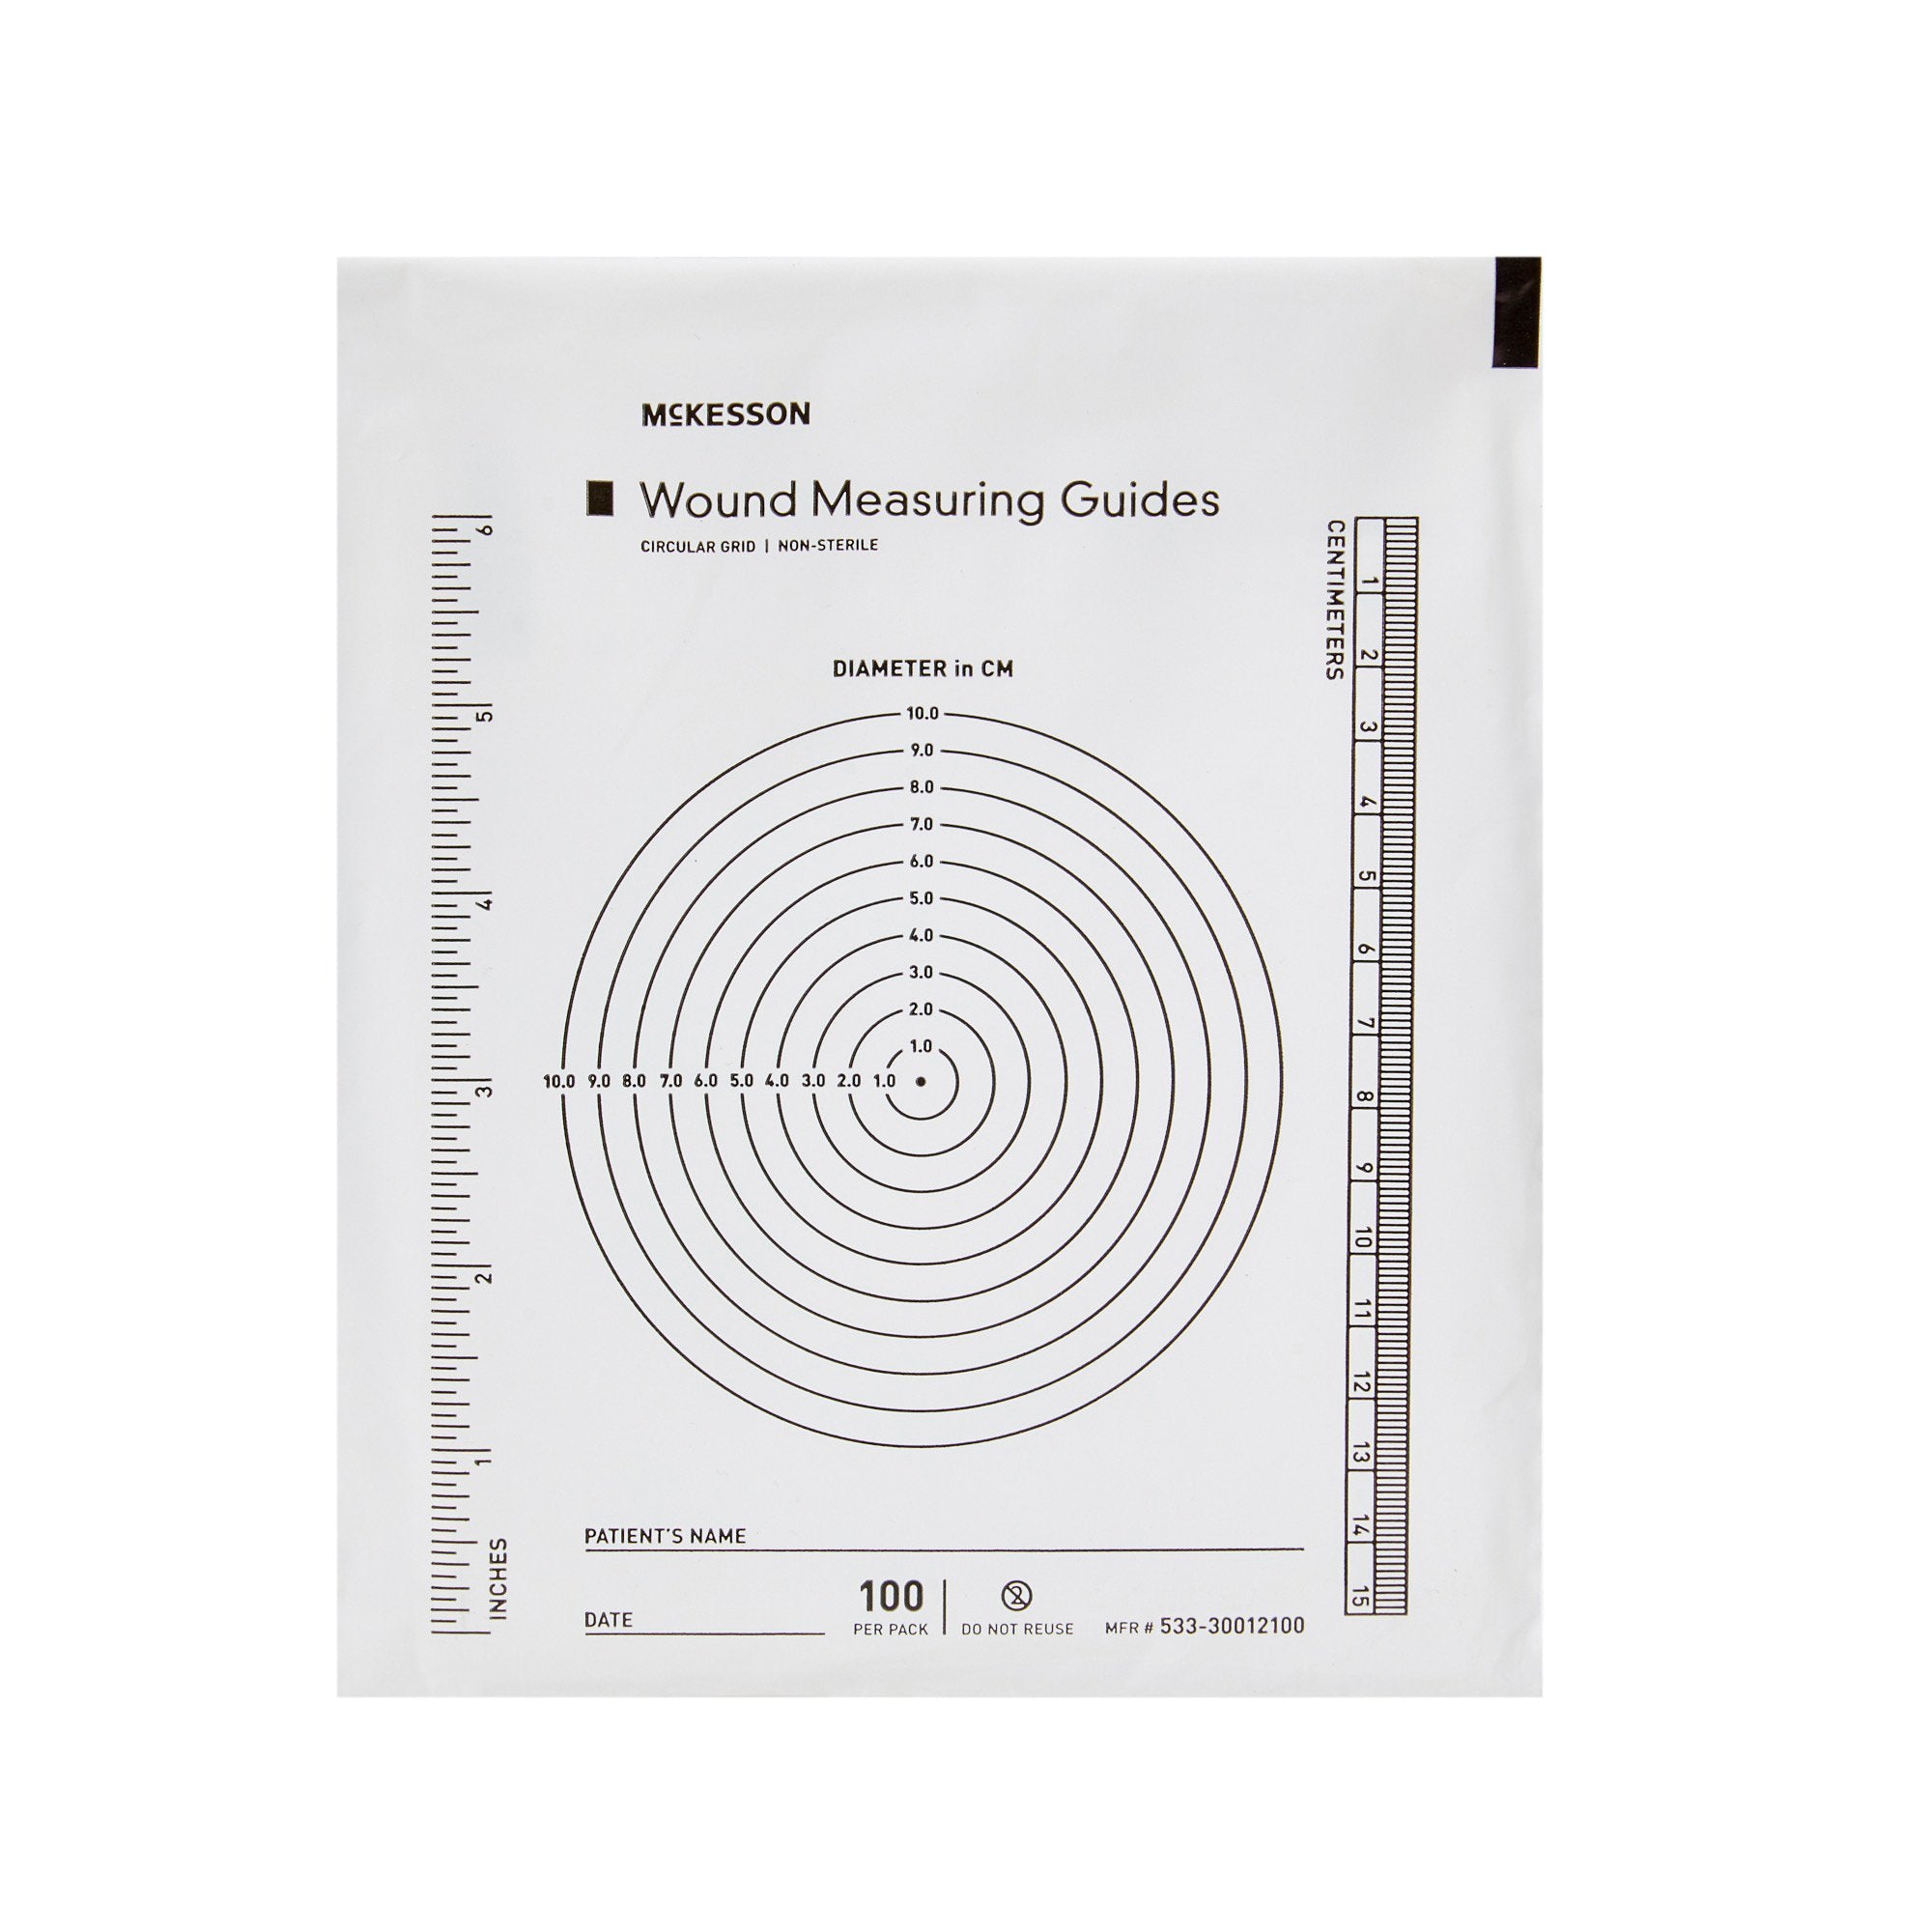 Wound Measuring Guide McKesson Metric / English Clear Plastic 5 X 7 Inch